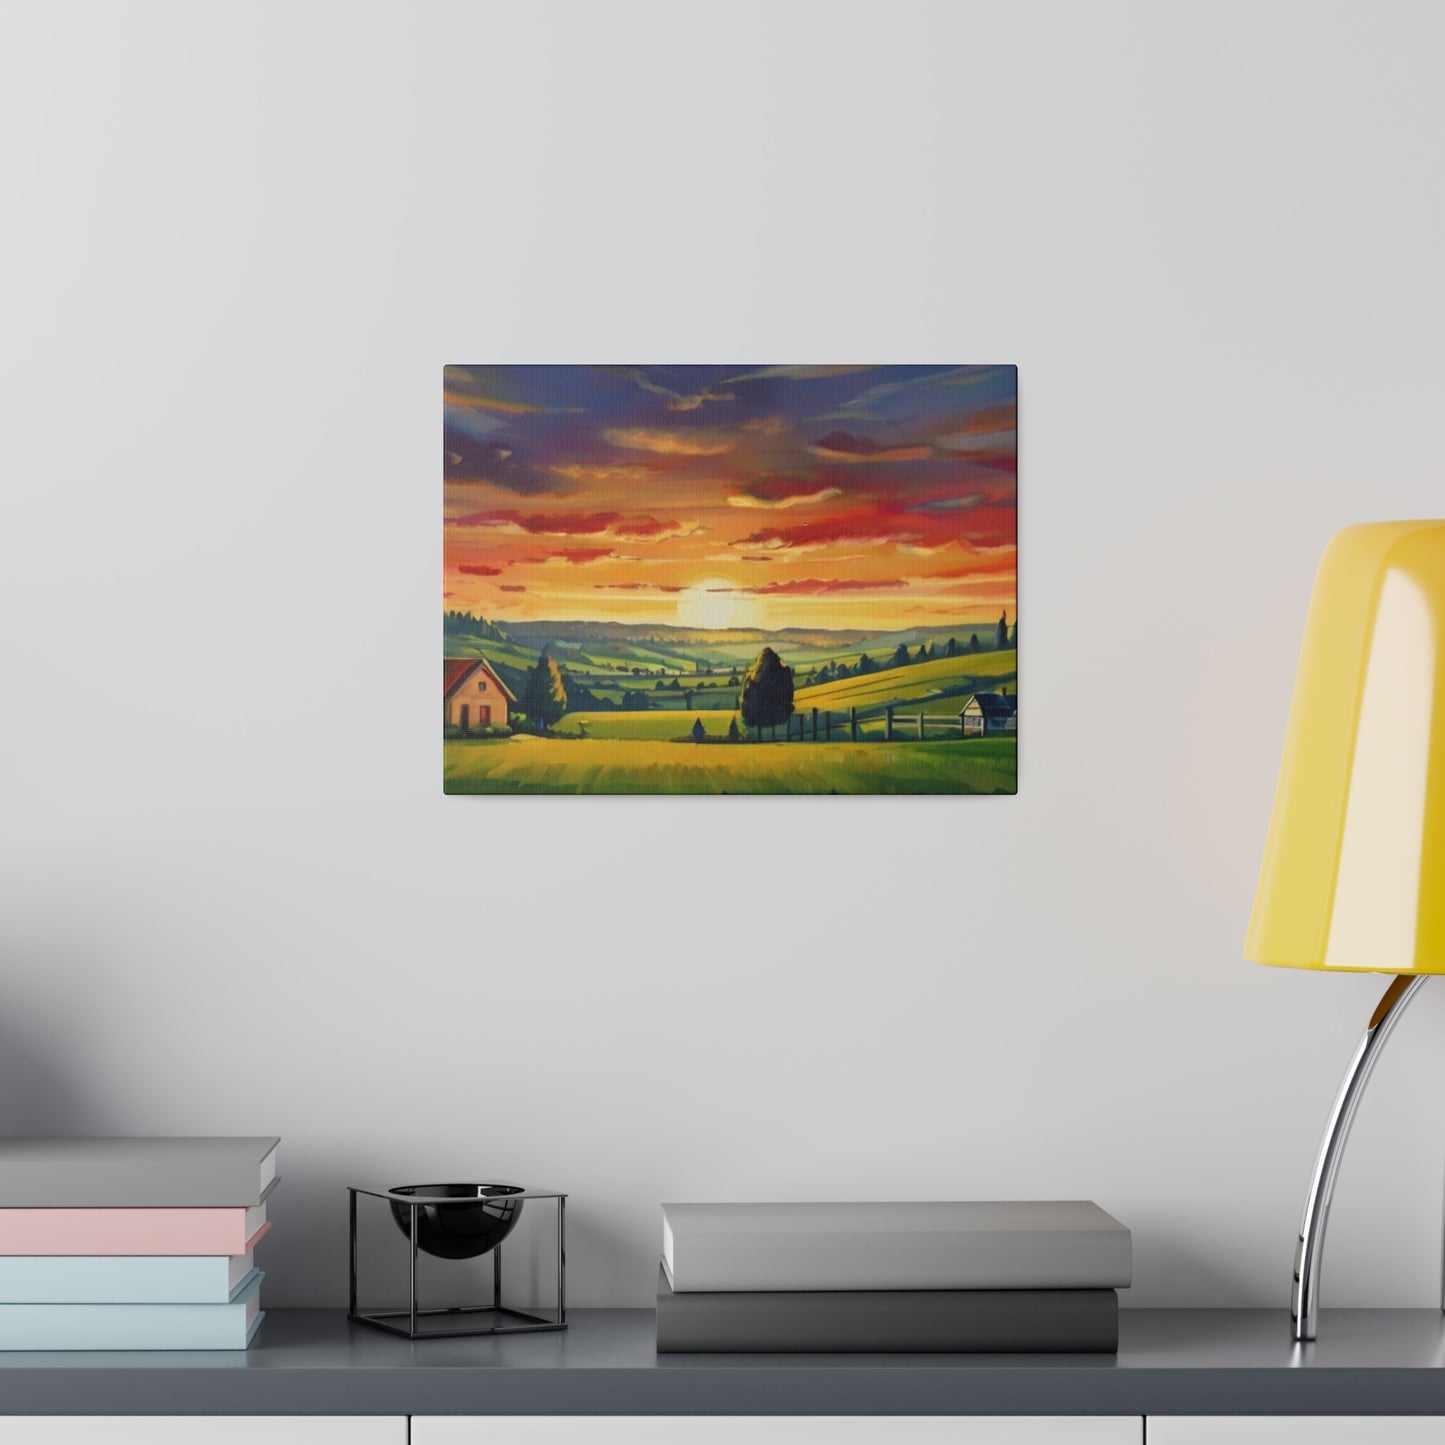 Sunset Over Countryside - Matte Canvas, Stretched, 0.75"